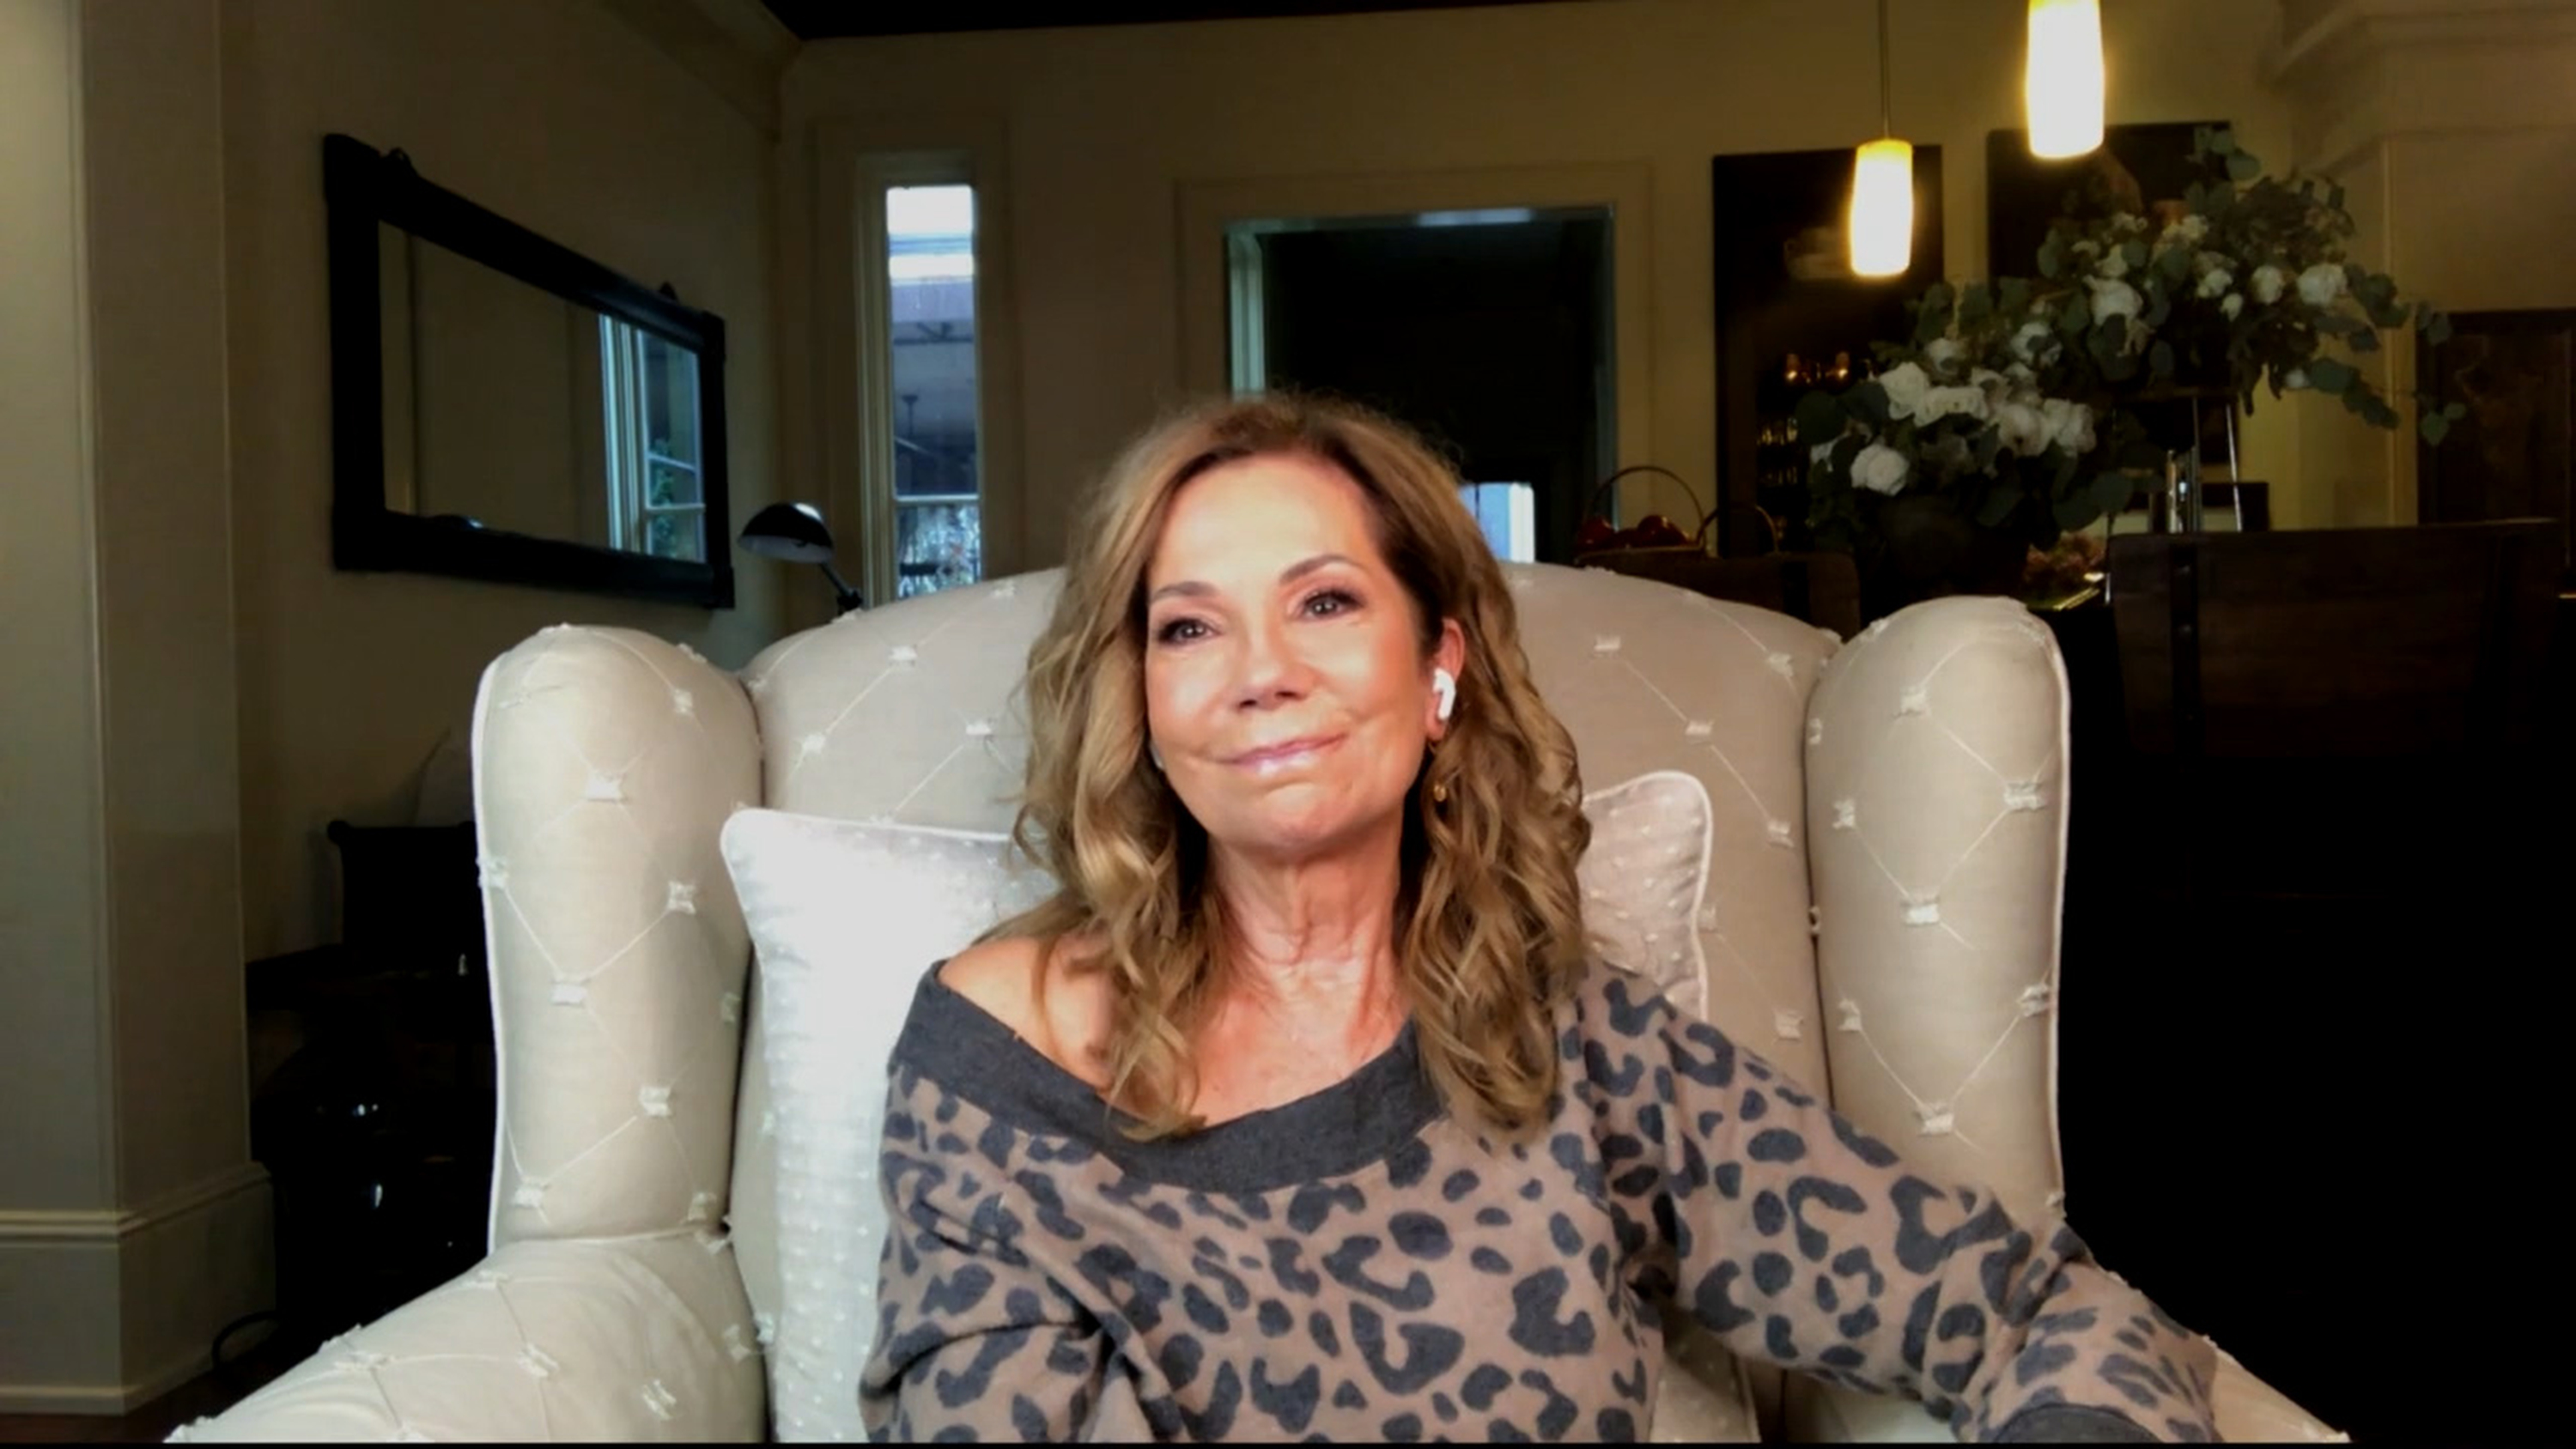 Kathie Lee Gifford sitting in a chair smiling